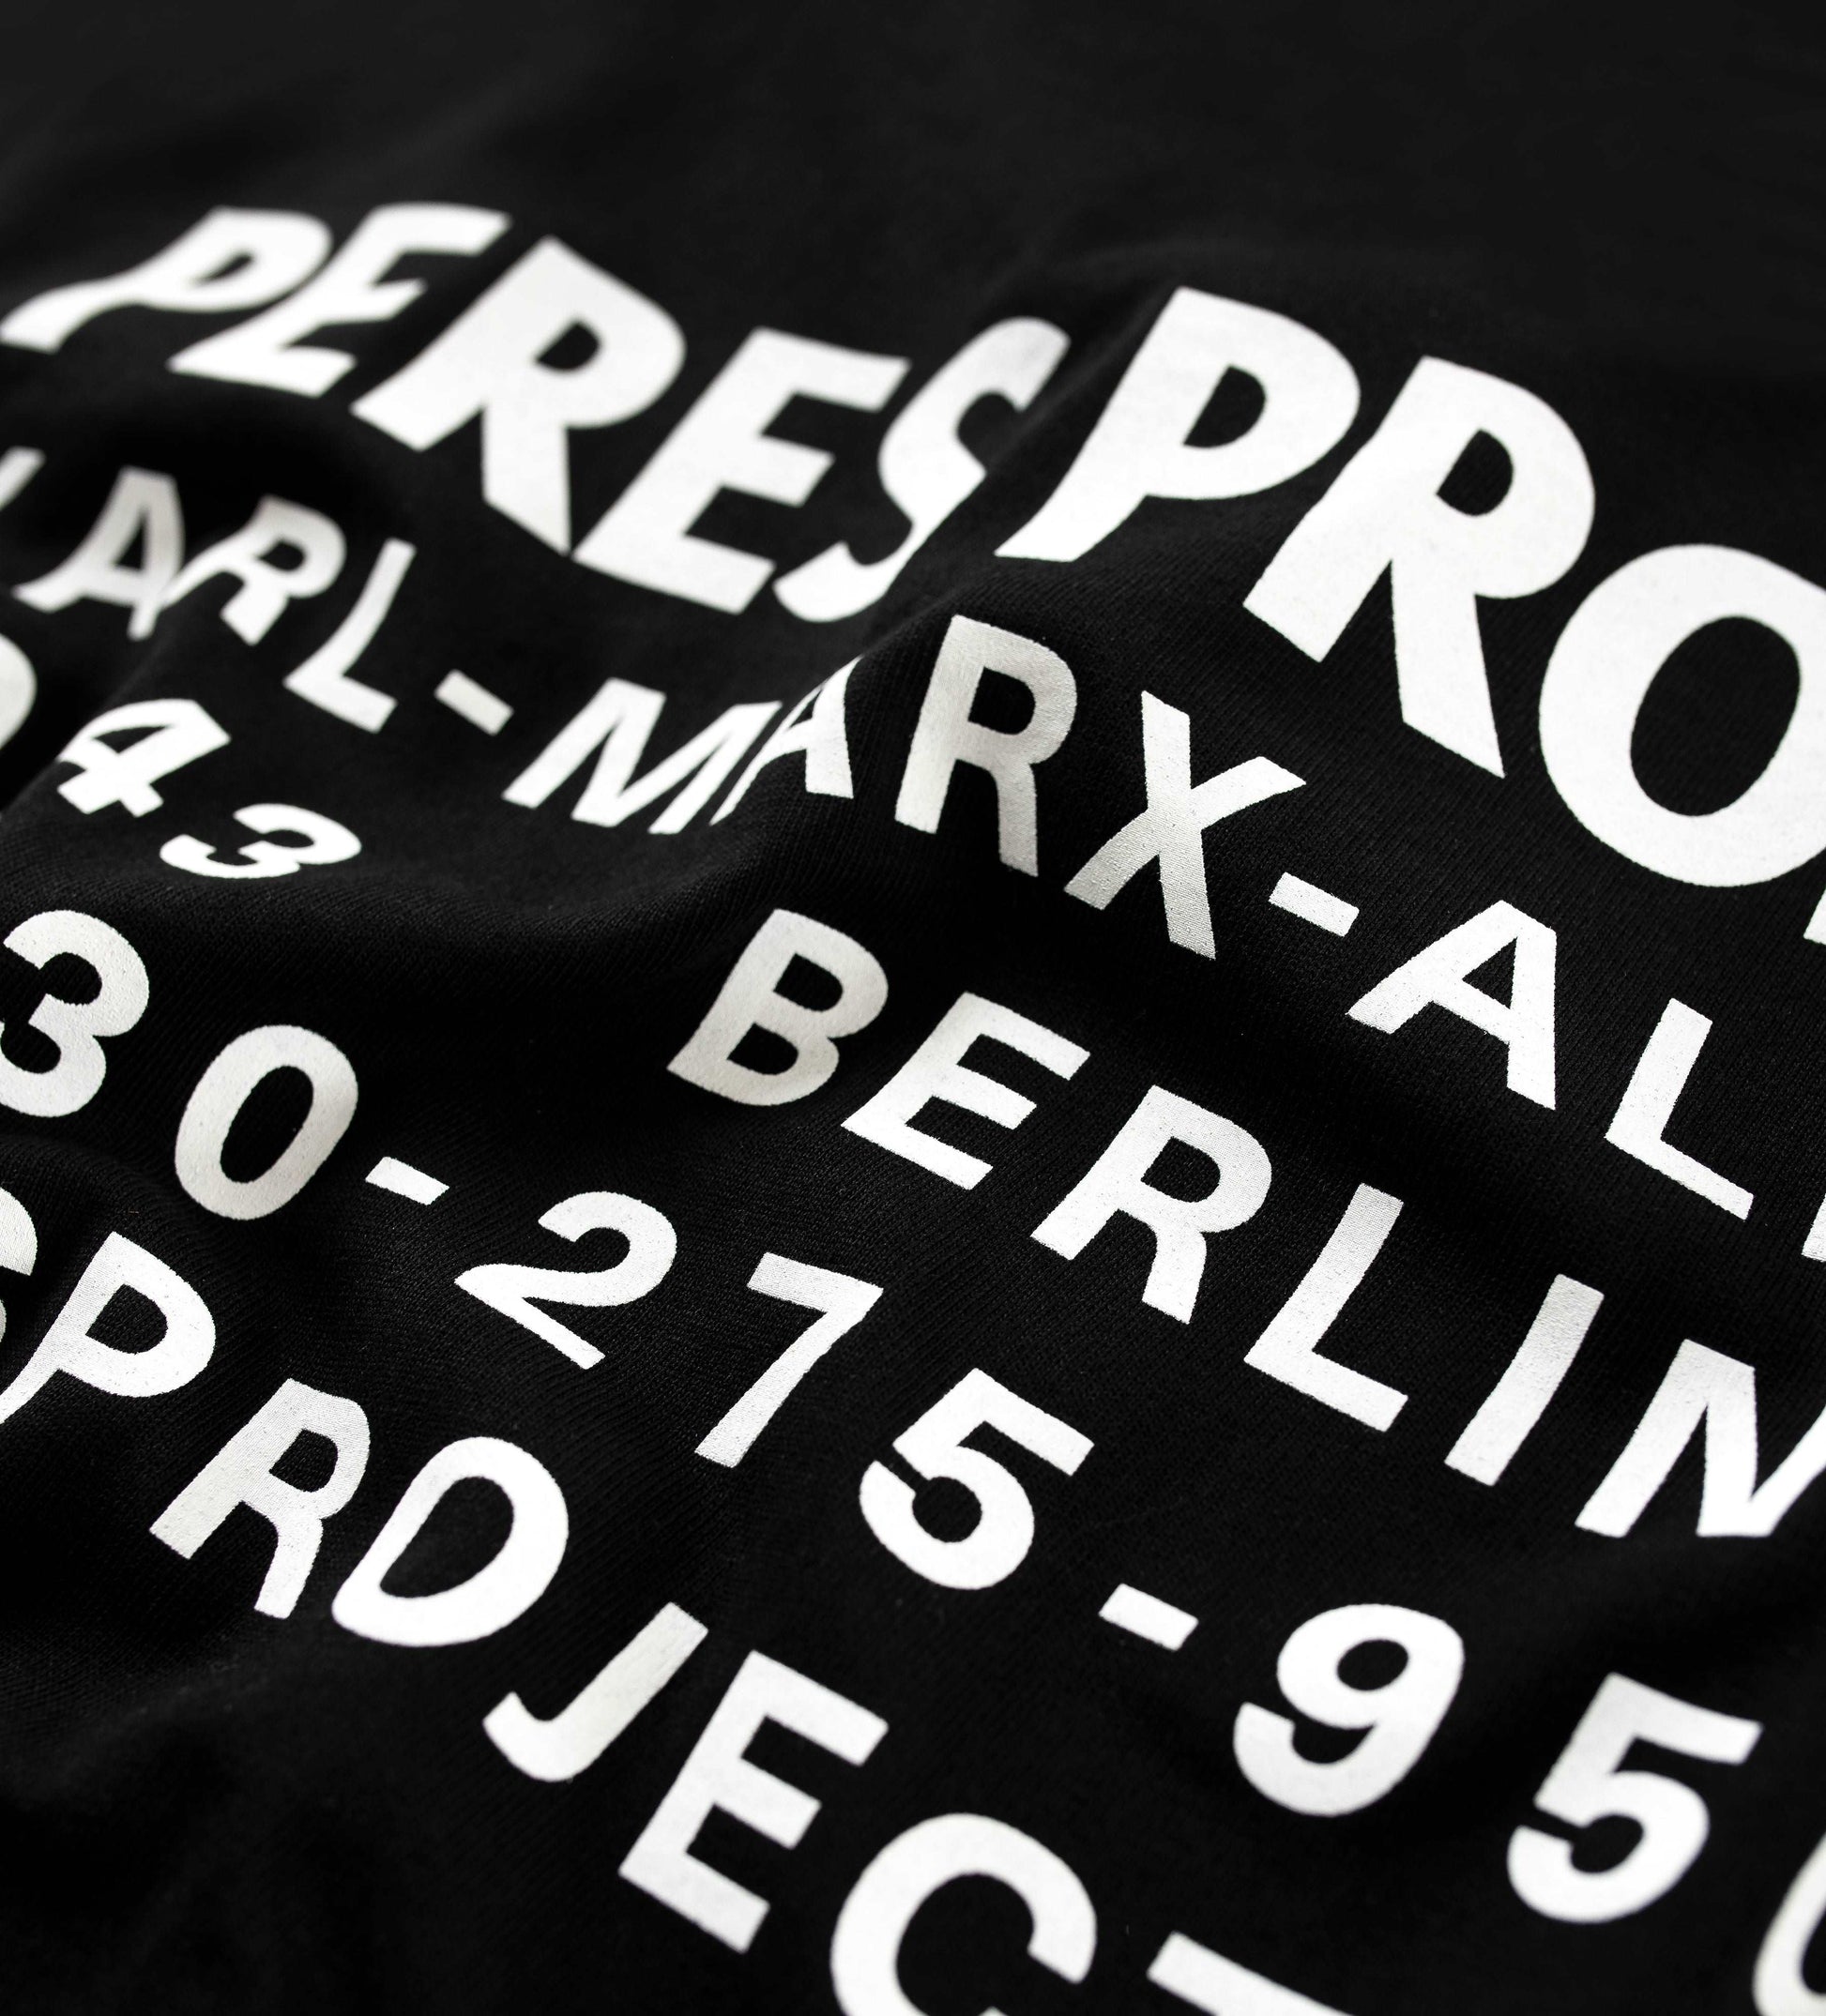 Peres Projects Berlin T-Shirt